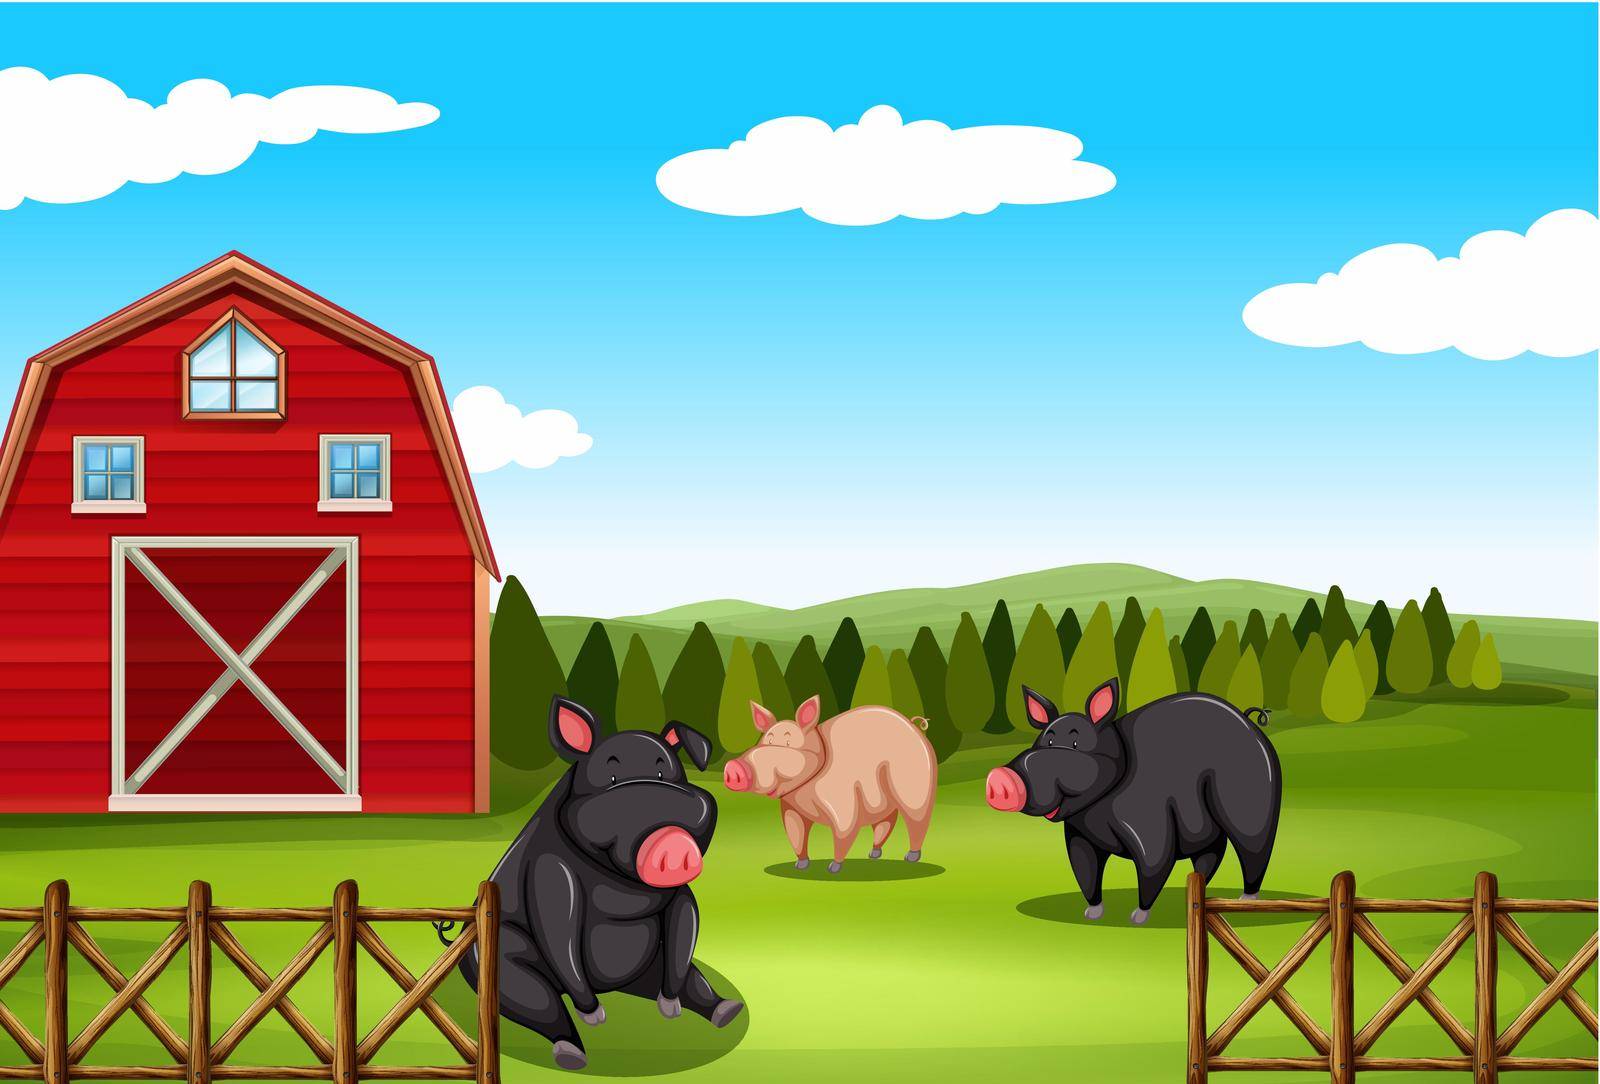 Pigs in a farm by iimages